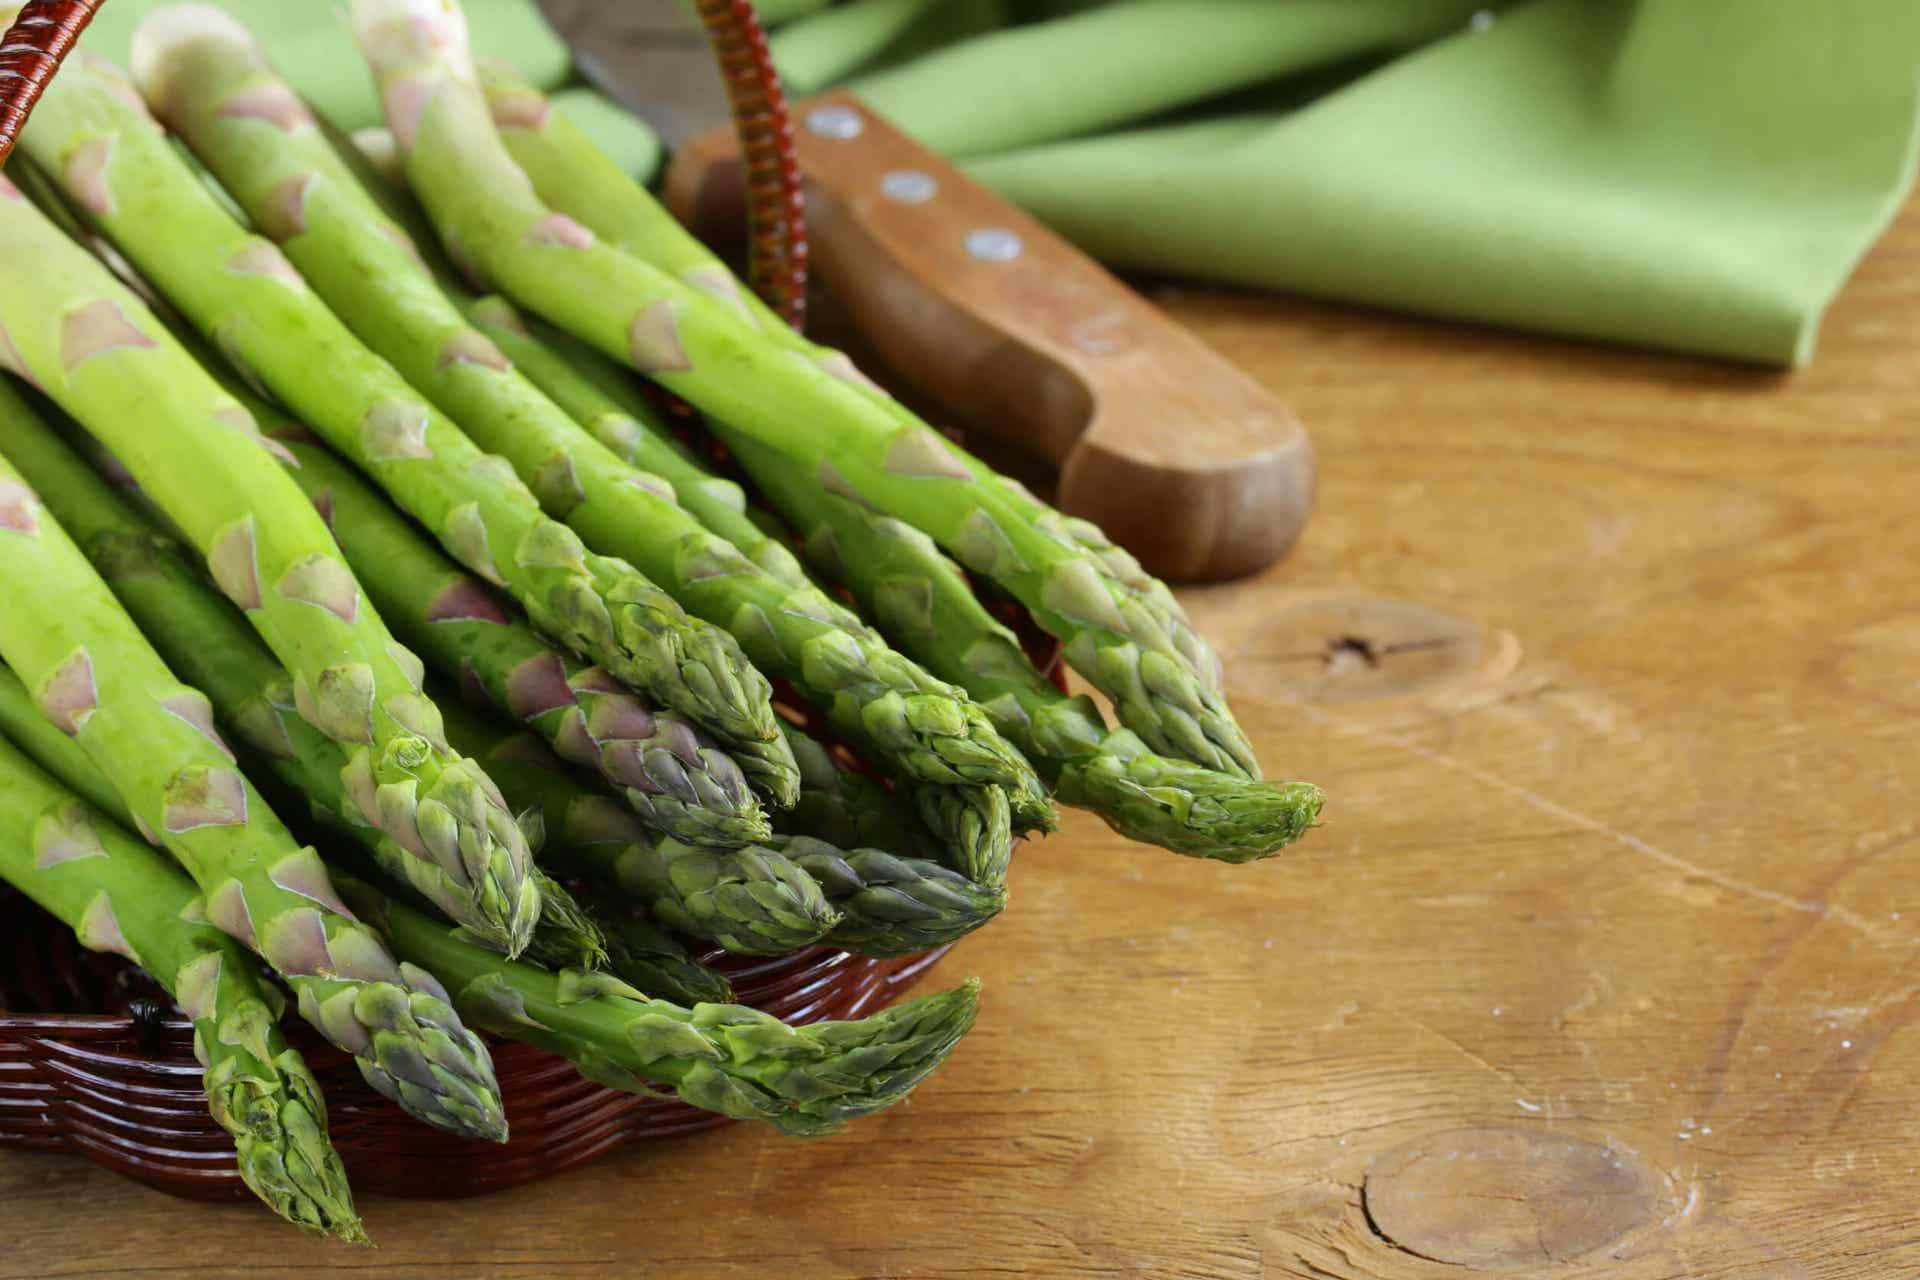 eating asparagus has many benefits